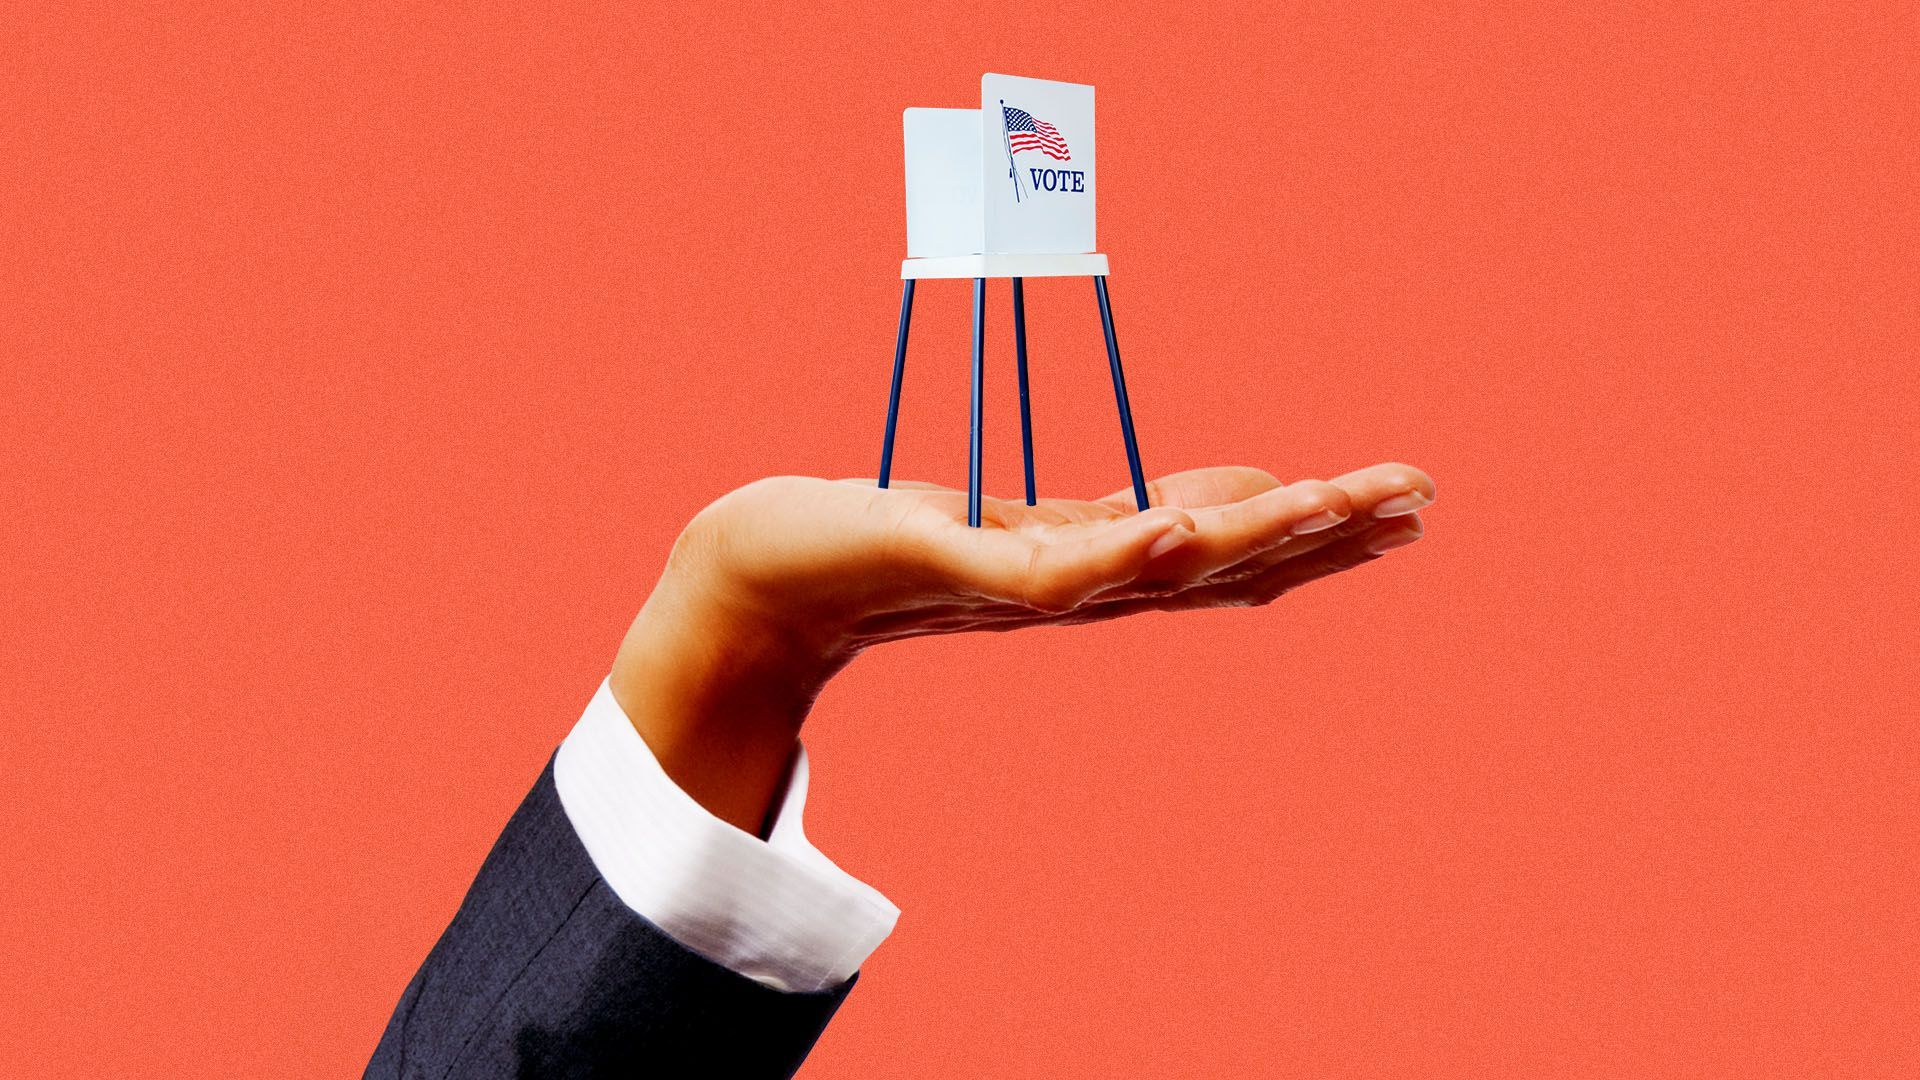 Illustration of a hand in a suit holding a tiny voting booth